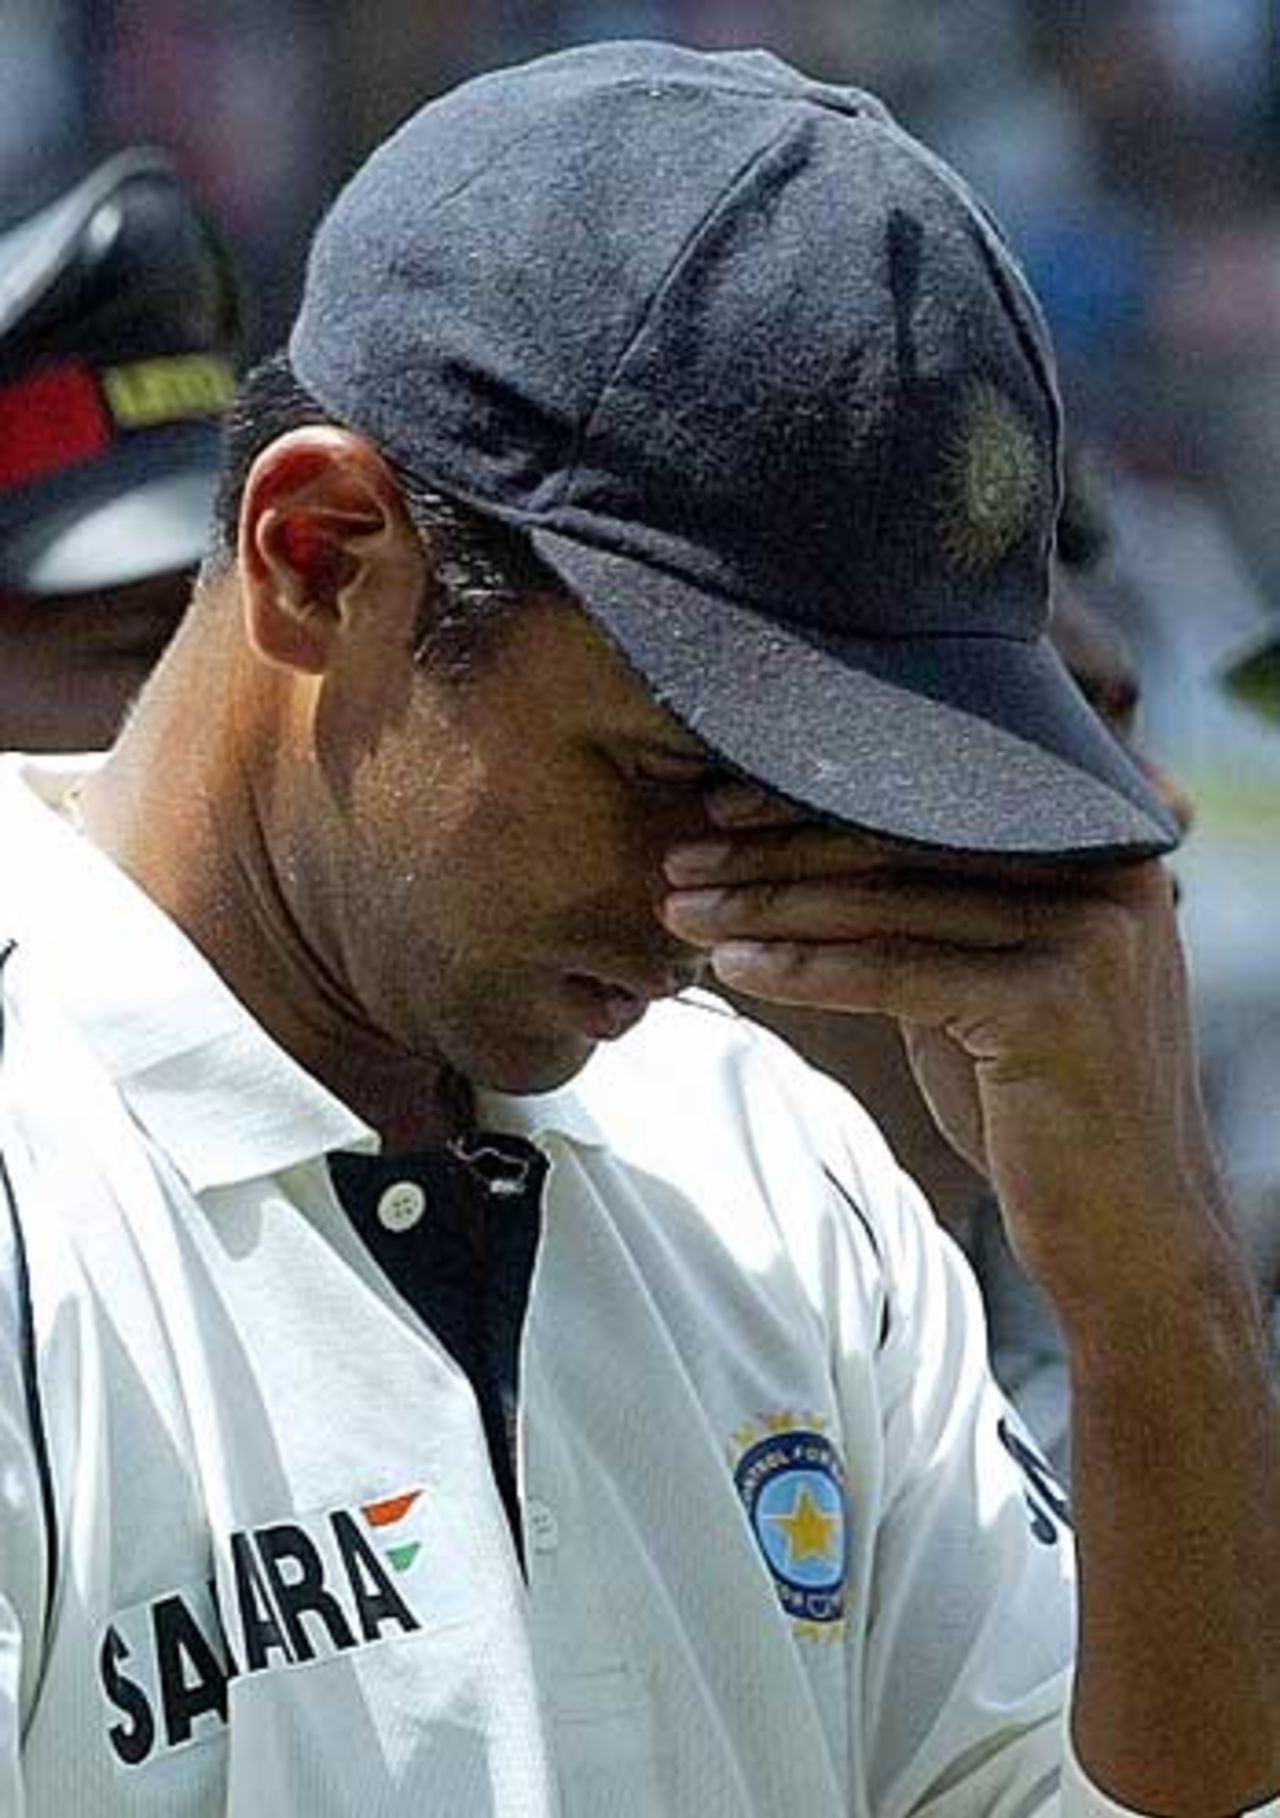 A dejected Rahul Dravid reflects on losing to England, India v England, 3rd Test, Mumbai, March 22, 2006